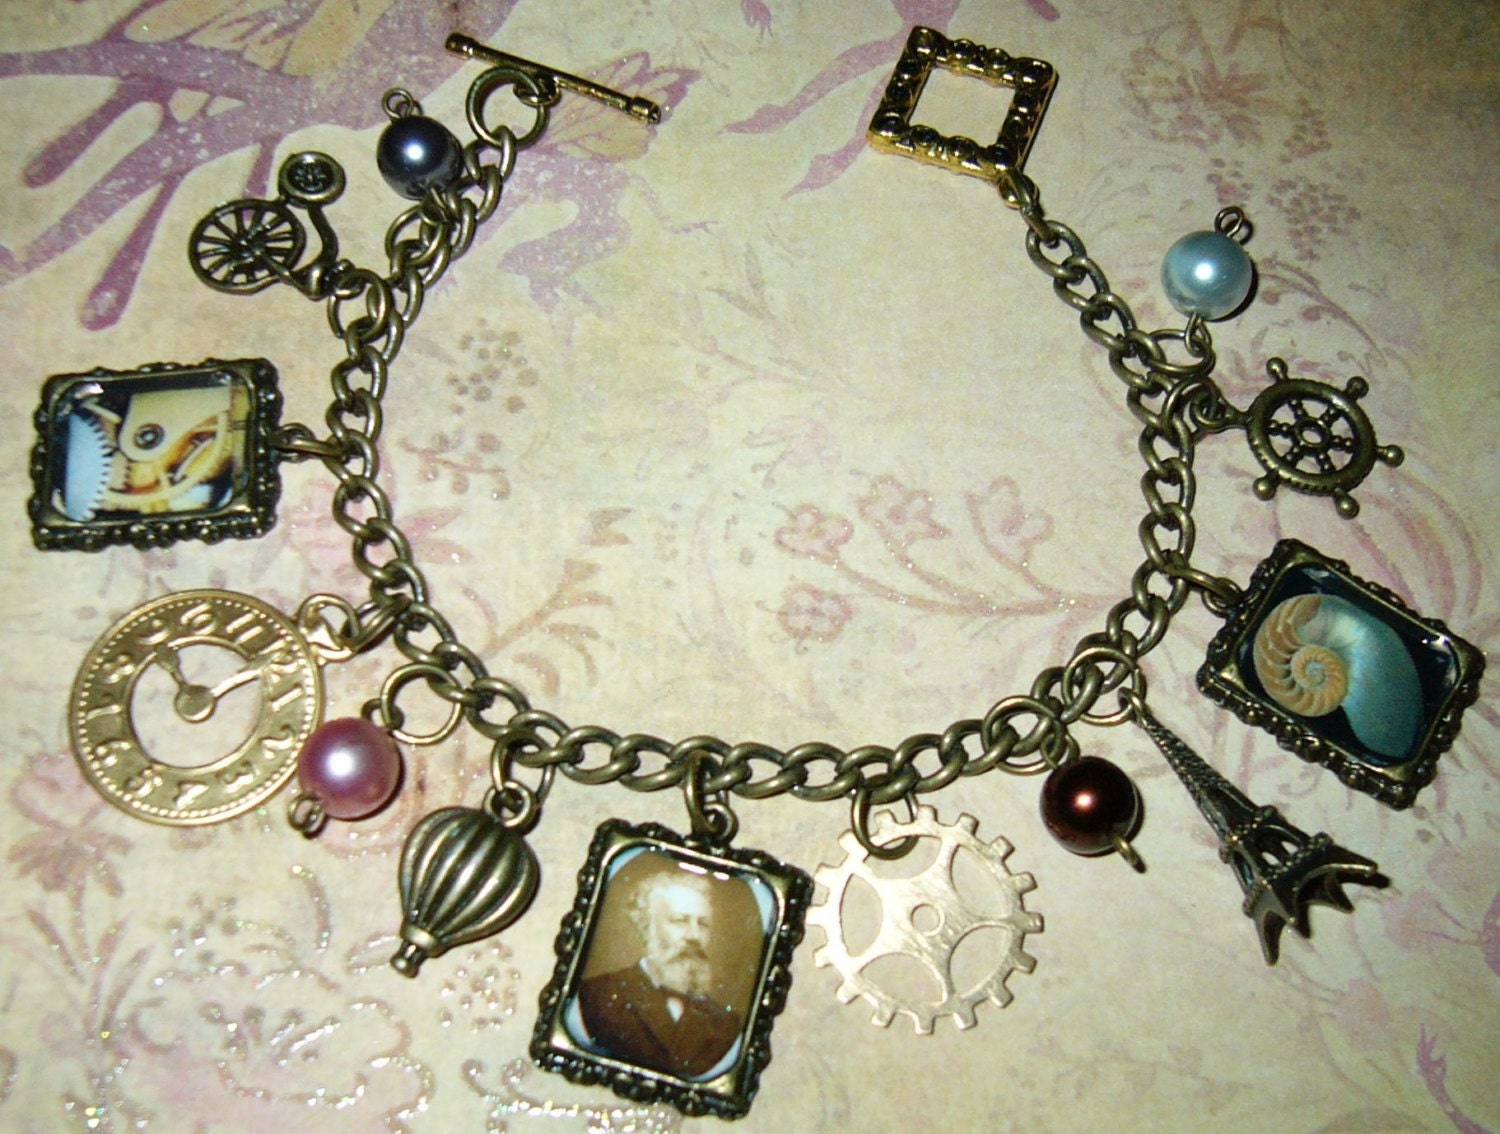 Steampunk Jules Verne Charm Bracelet, Altered Art, Vintage Style Charms, Cogs, Gears and Pearls- Handmade One of a Kind